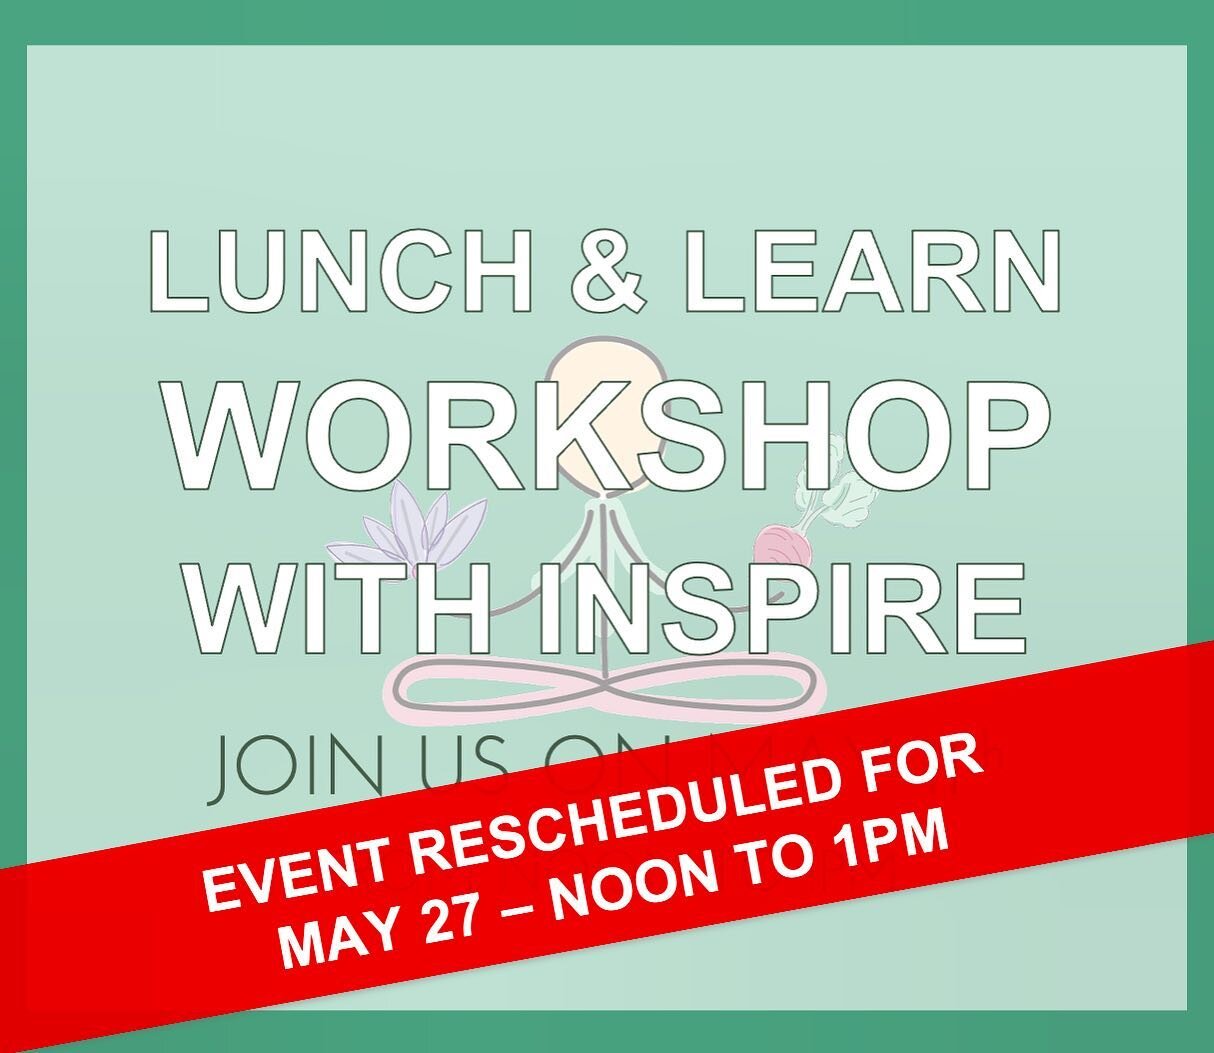 ‼️ Our Inspire Lunch &amp; Learn Workshop has been rescheduled for May 27 from Noon to 1PM. We apologize for any inconvenience. ⁣
➡️ Link in bio for more info!